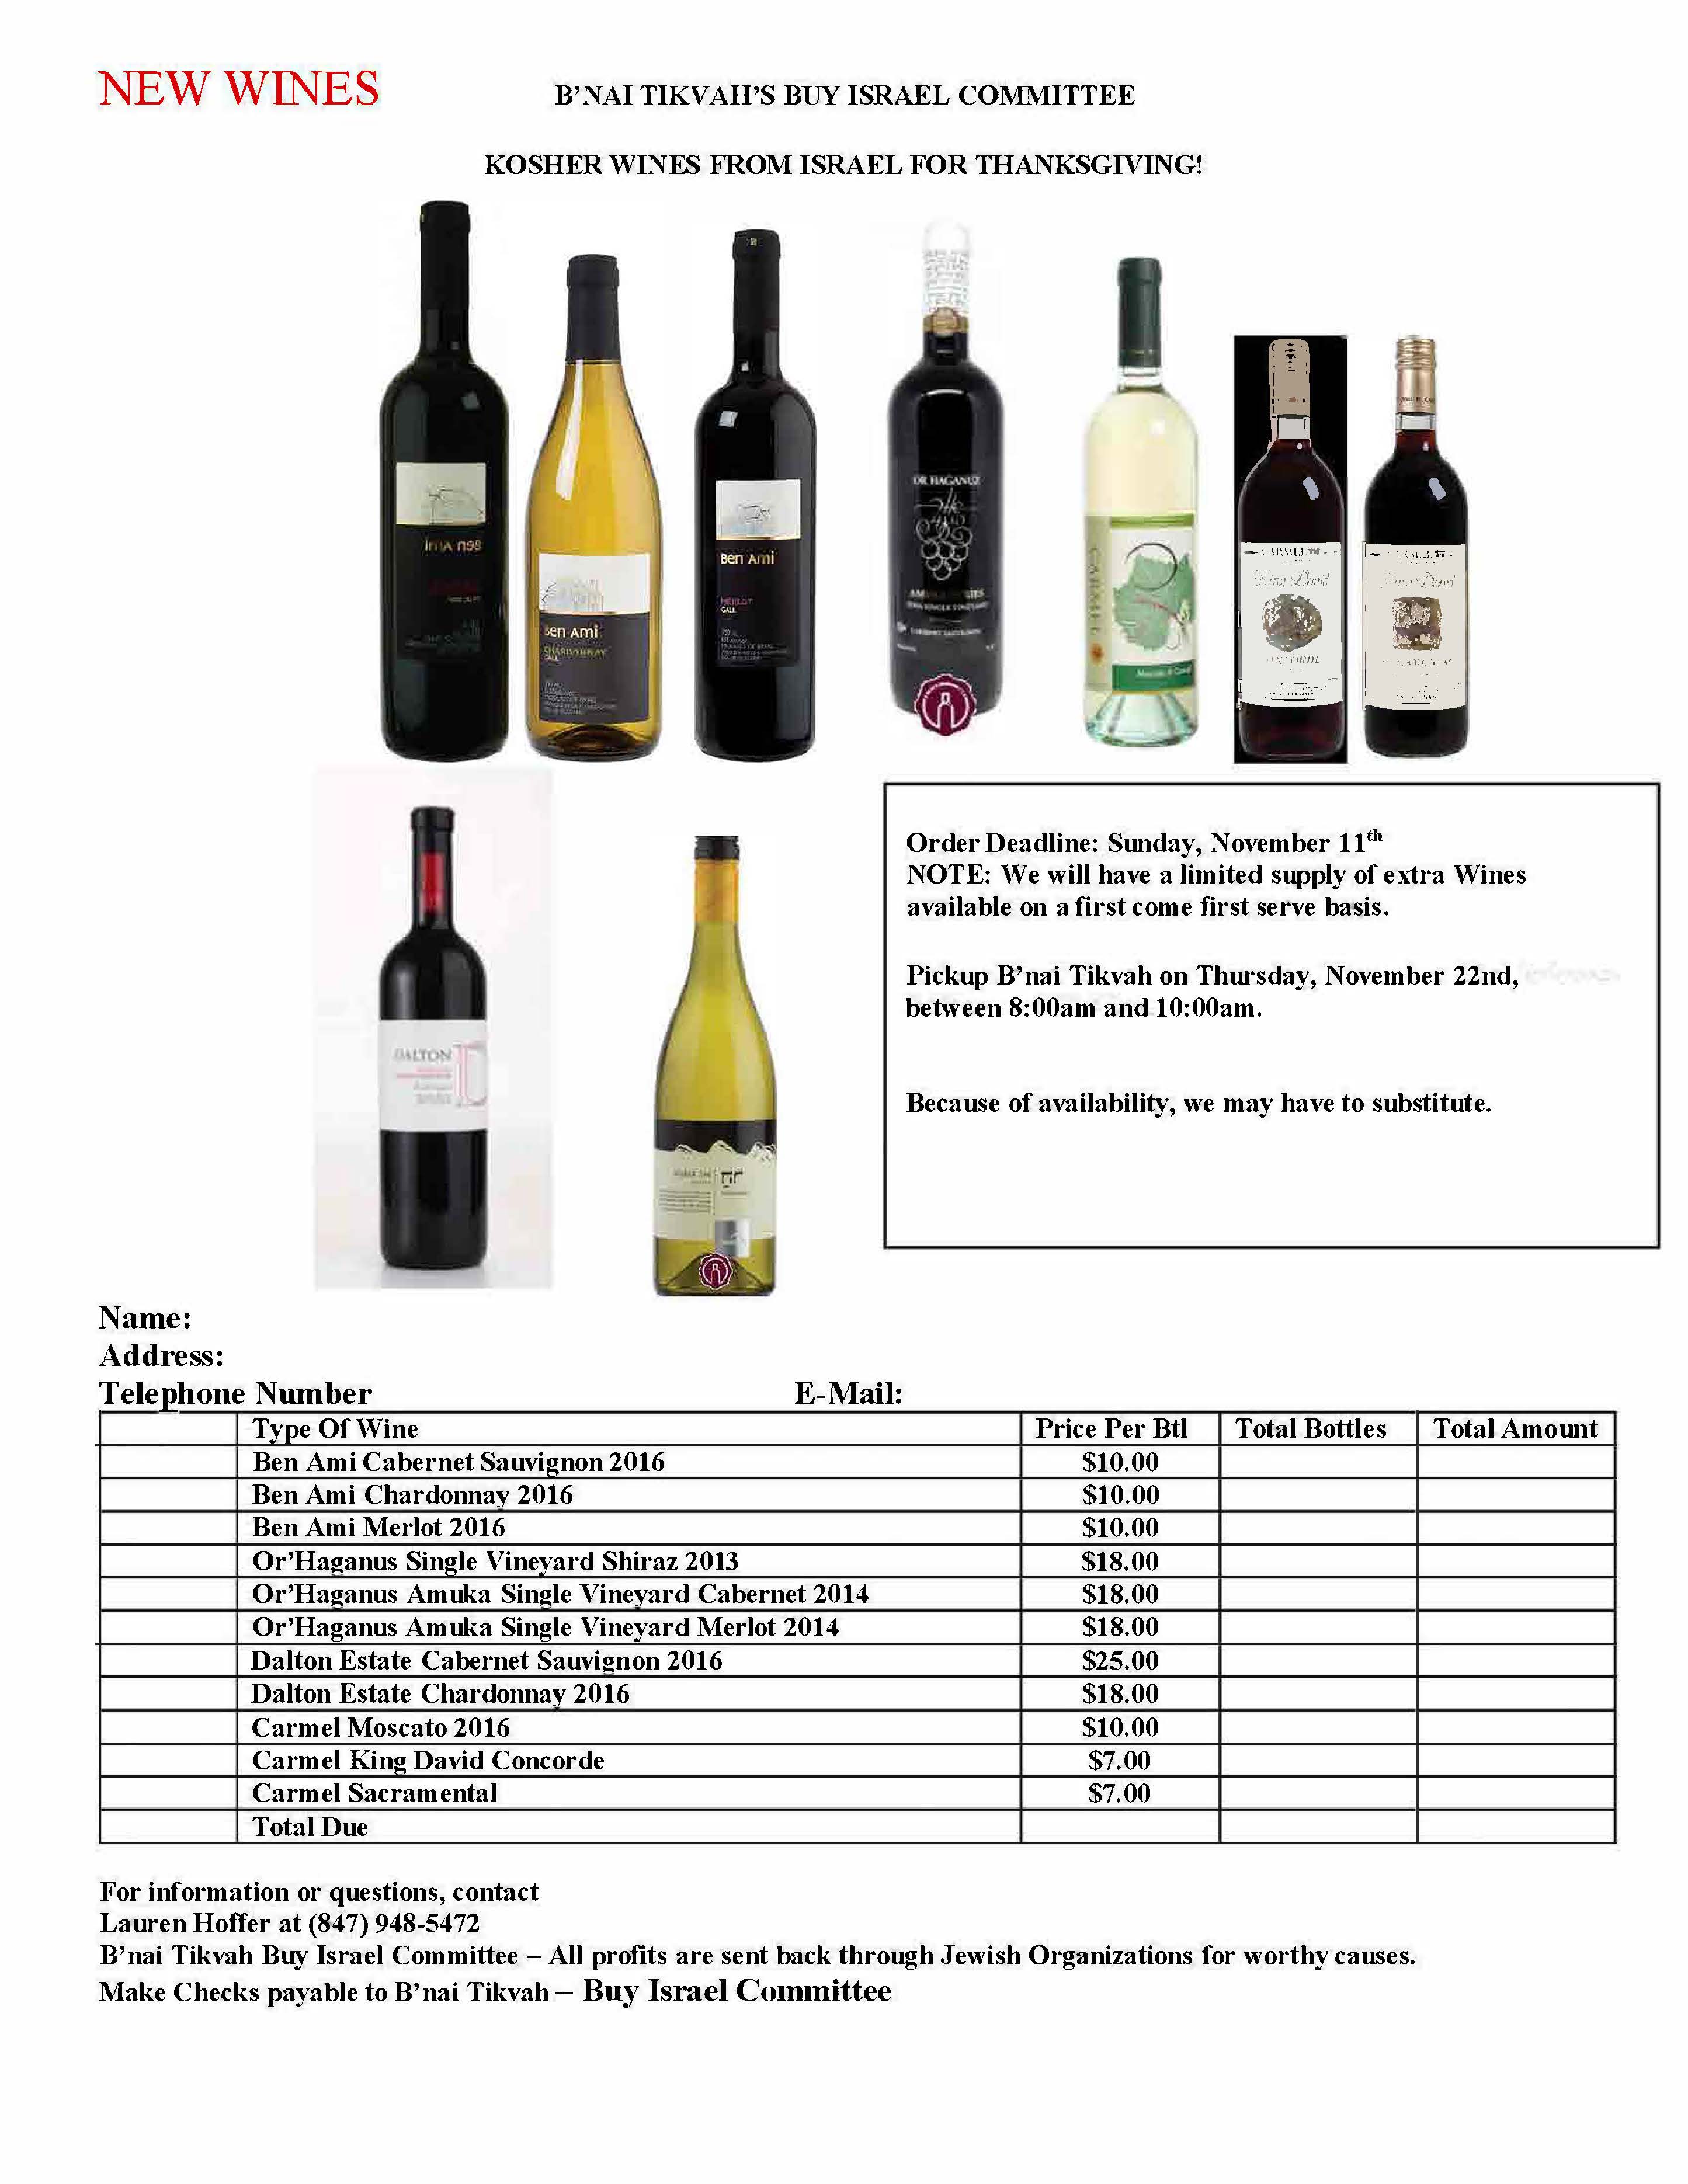 Kosher Wines from Israel for Thanksgiving